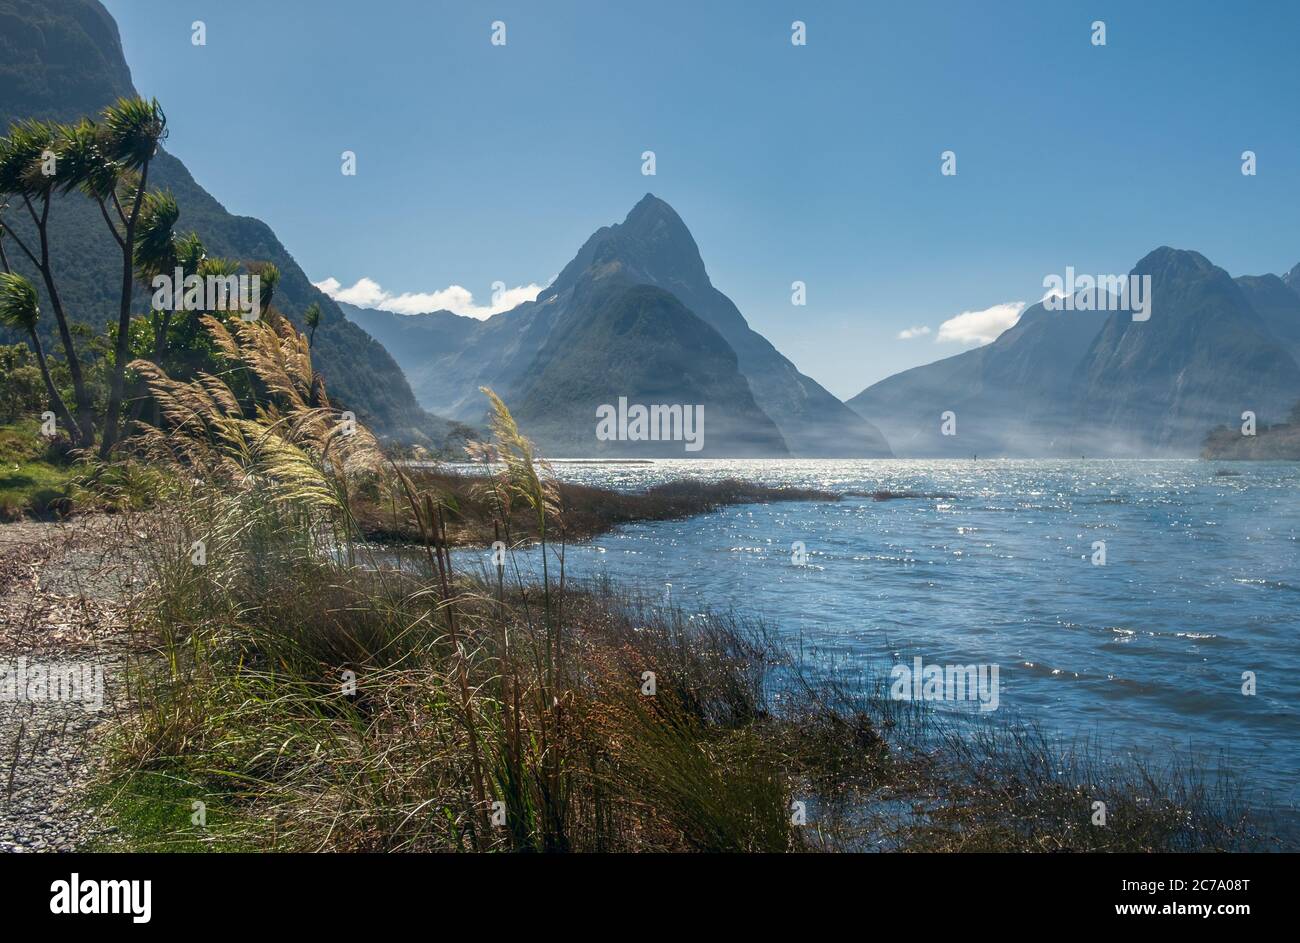 Mitre Peak towering above the morning fog in Milford Sound, New Zealand. Stock Photo